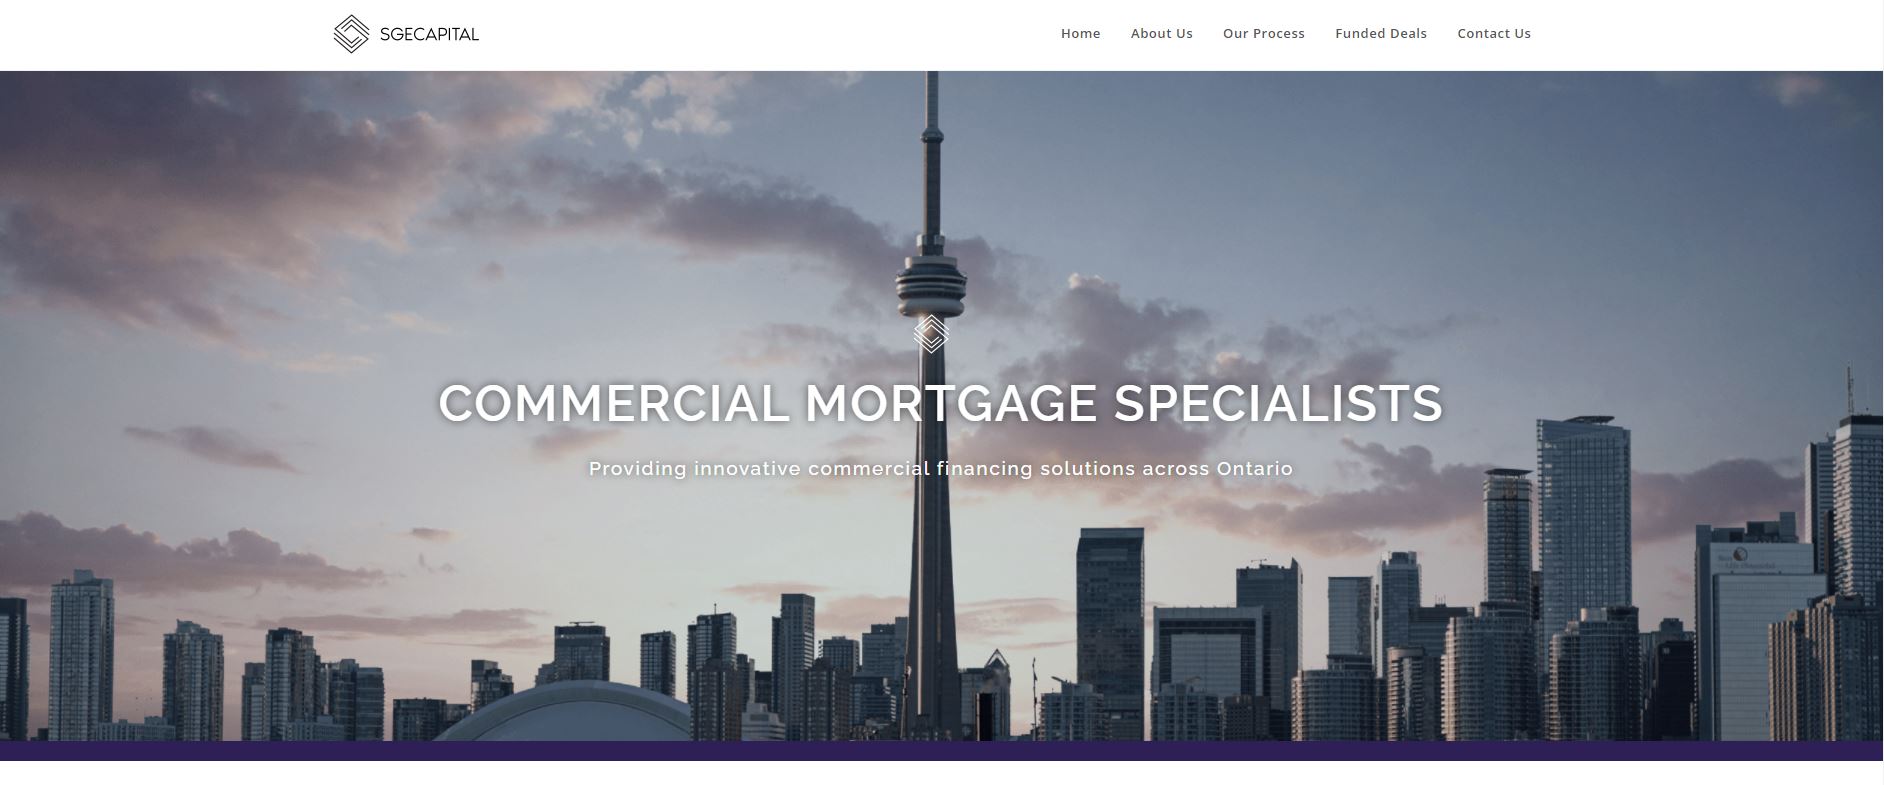 homepage picture of SGE Capital Inc.